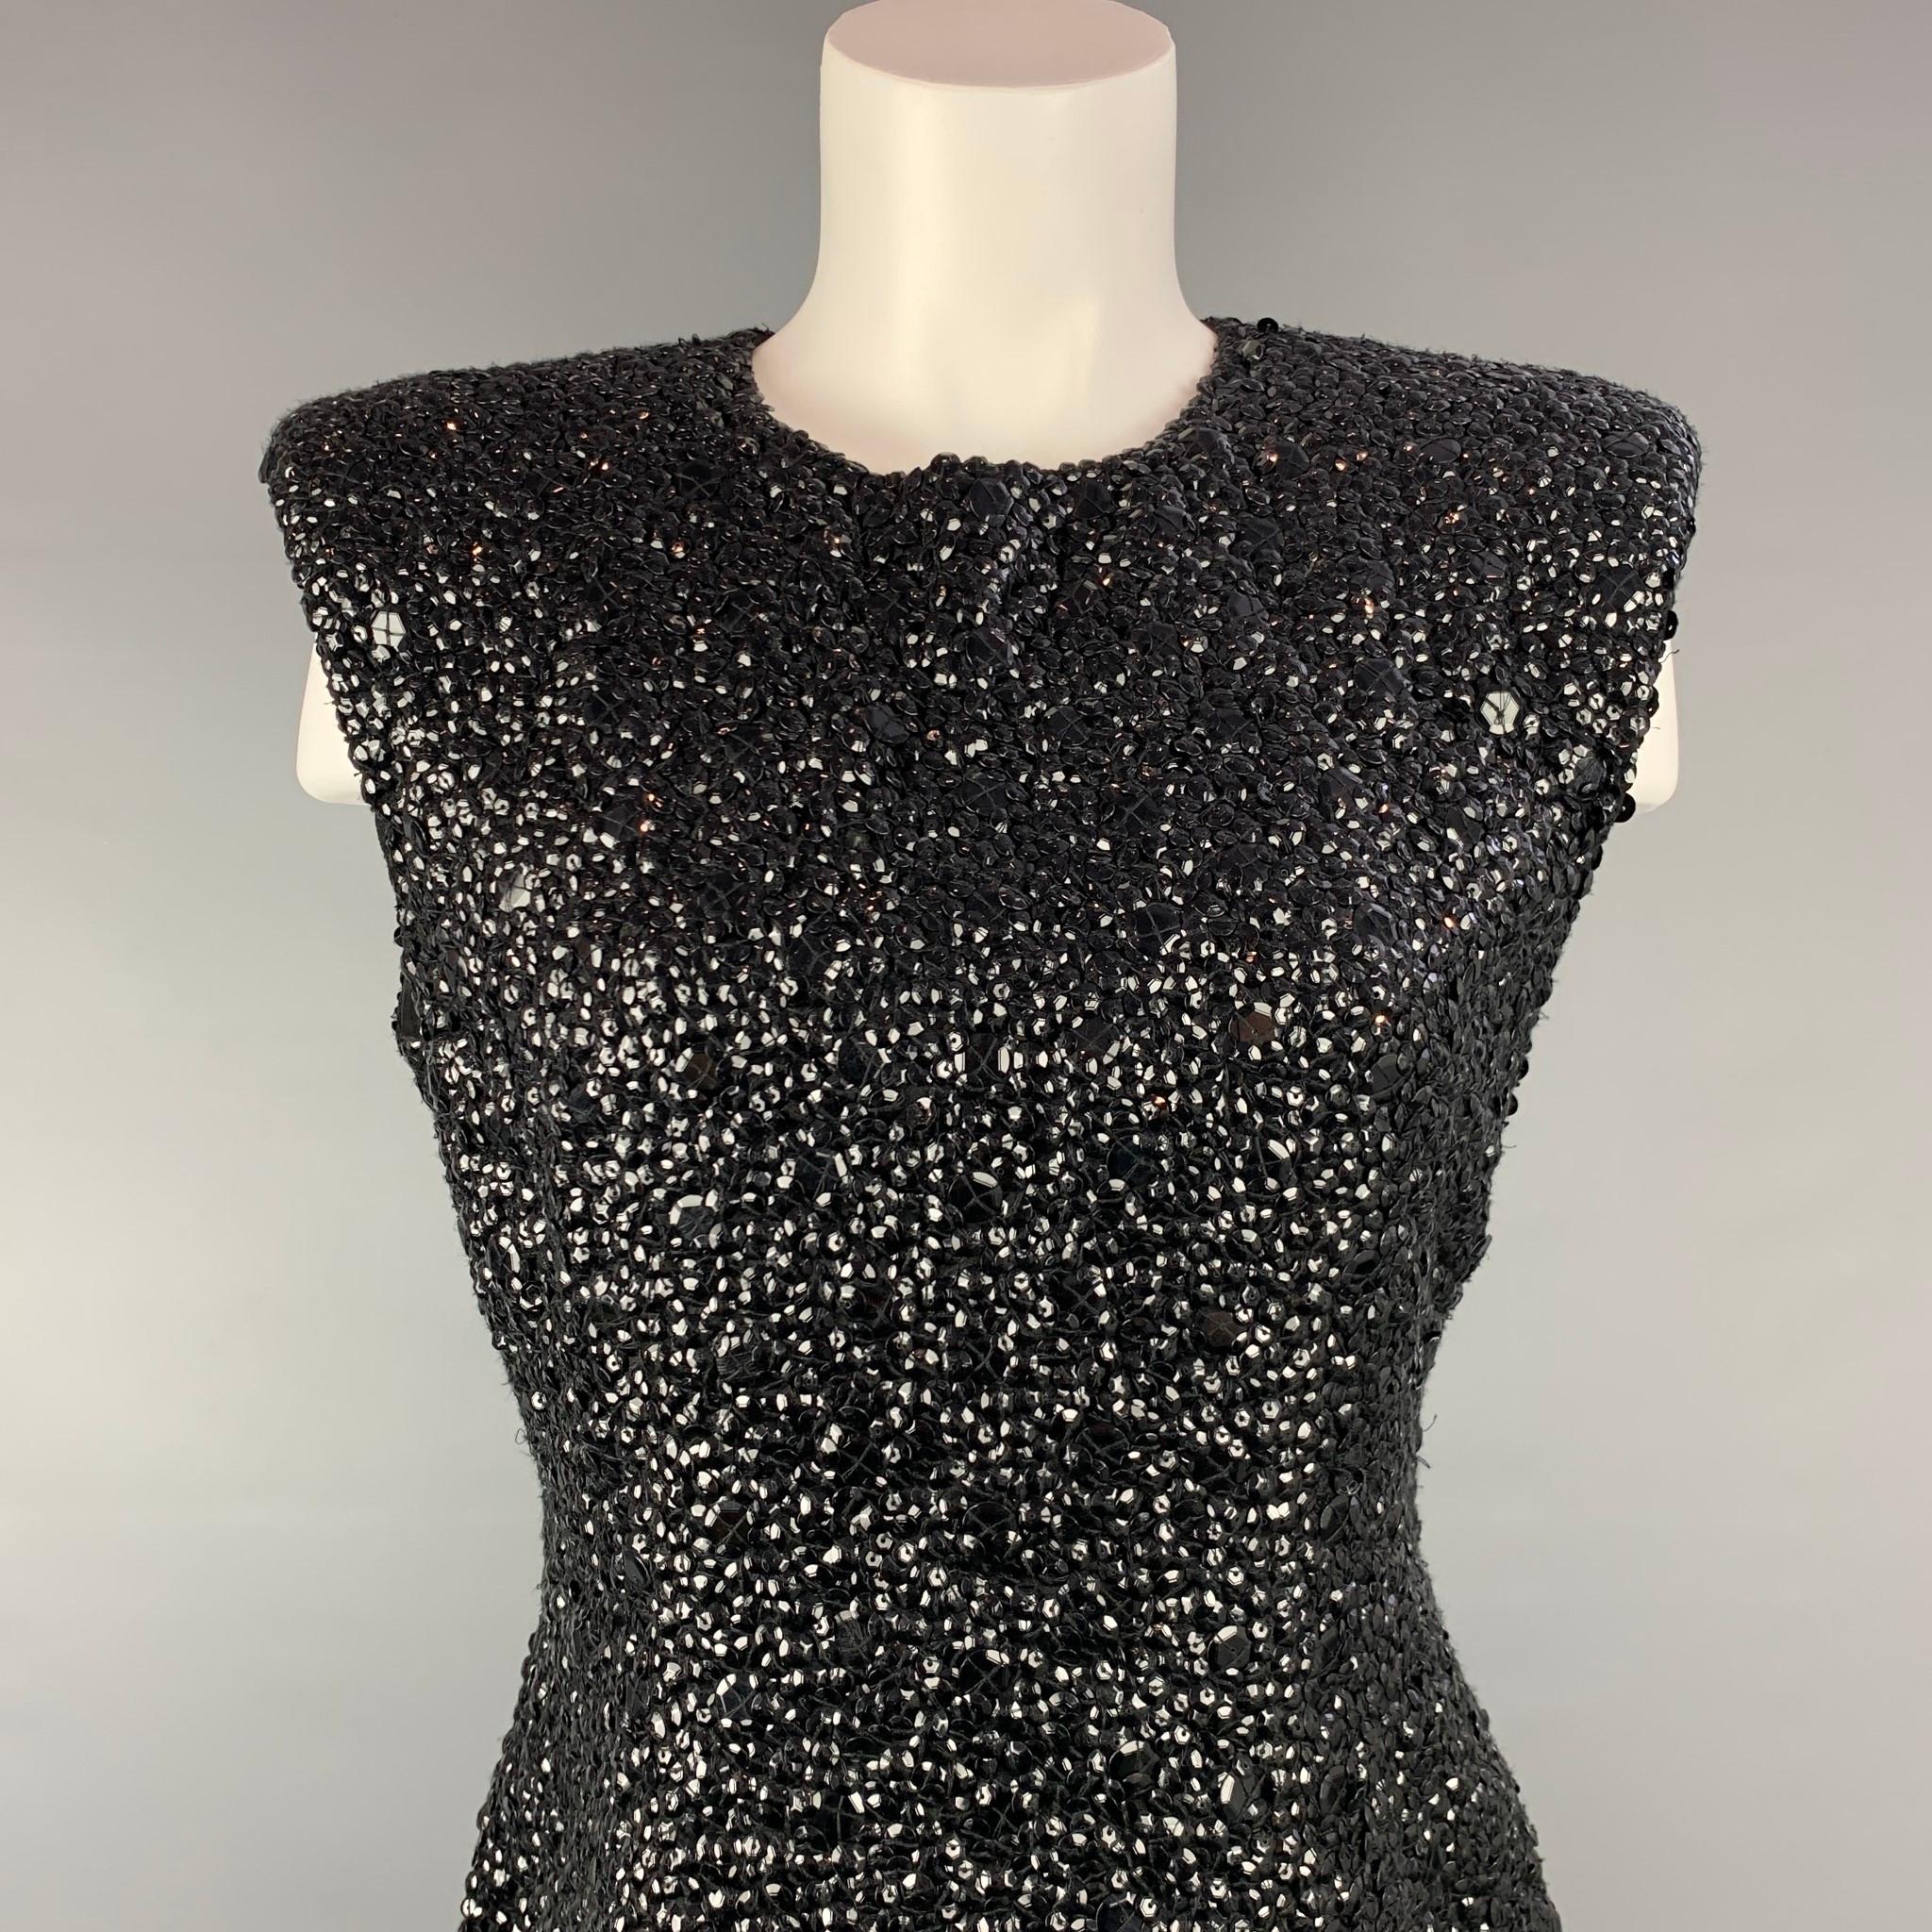 DRIES VAN NOTEN dress top comes in a black sequined textured viscose with a full silk liner featuring a sleeveless style and a back zip up closure.

New With Tags.
Marked: 38
Original Retail Price: $1,600.00

Measurements:

Shoulder: 17.5 in.
Bust: